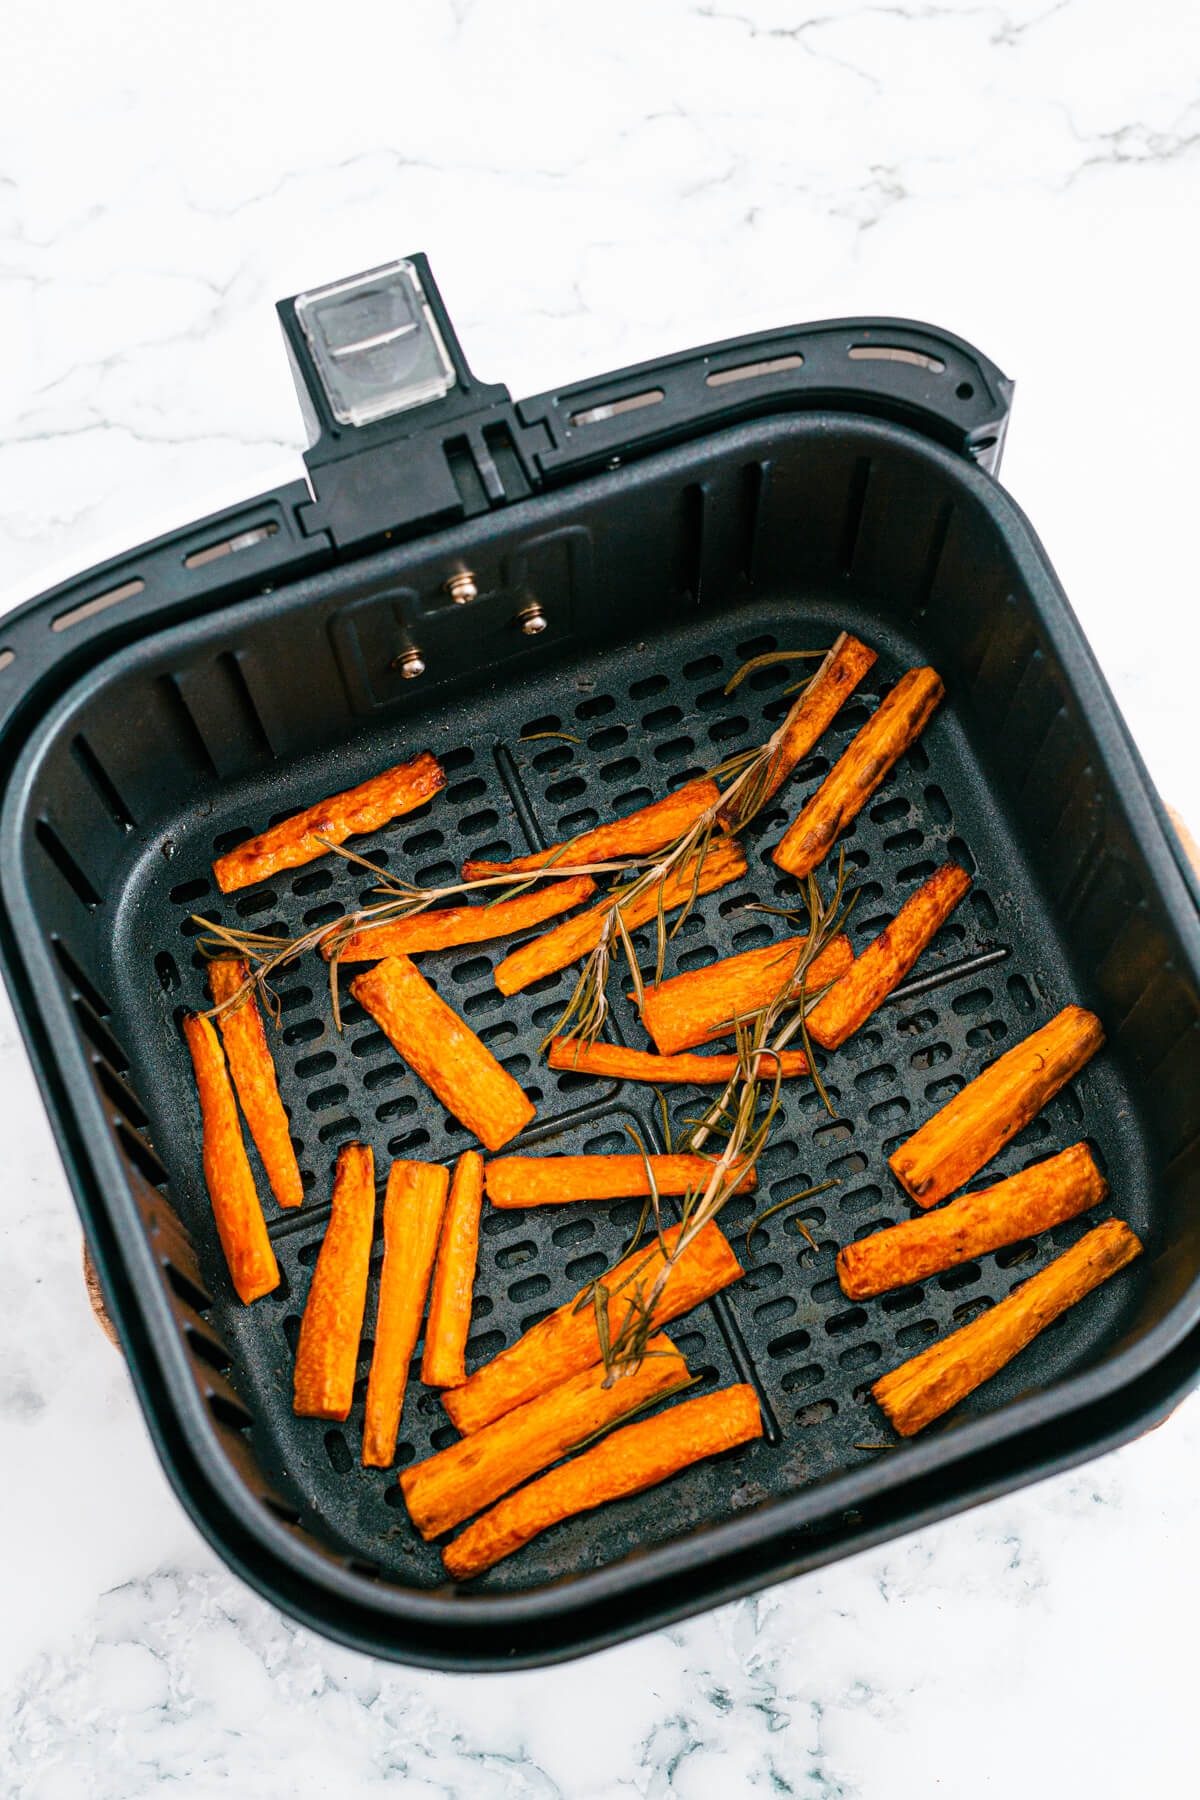 Roasted carrots in an air fryer basket.